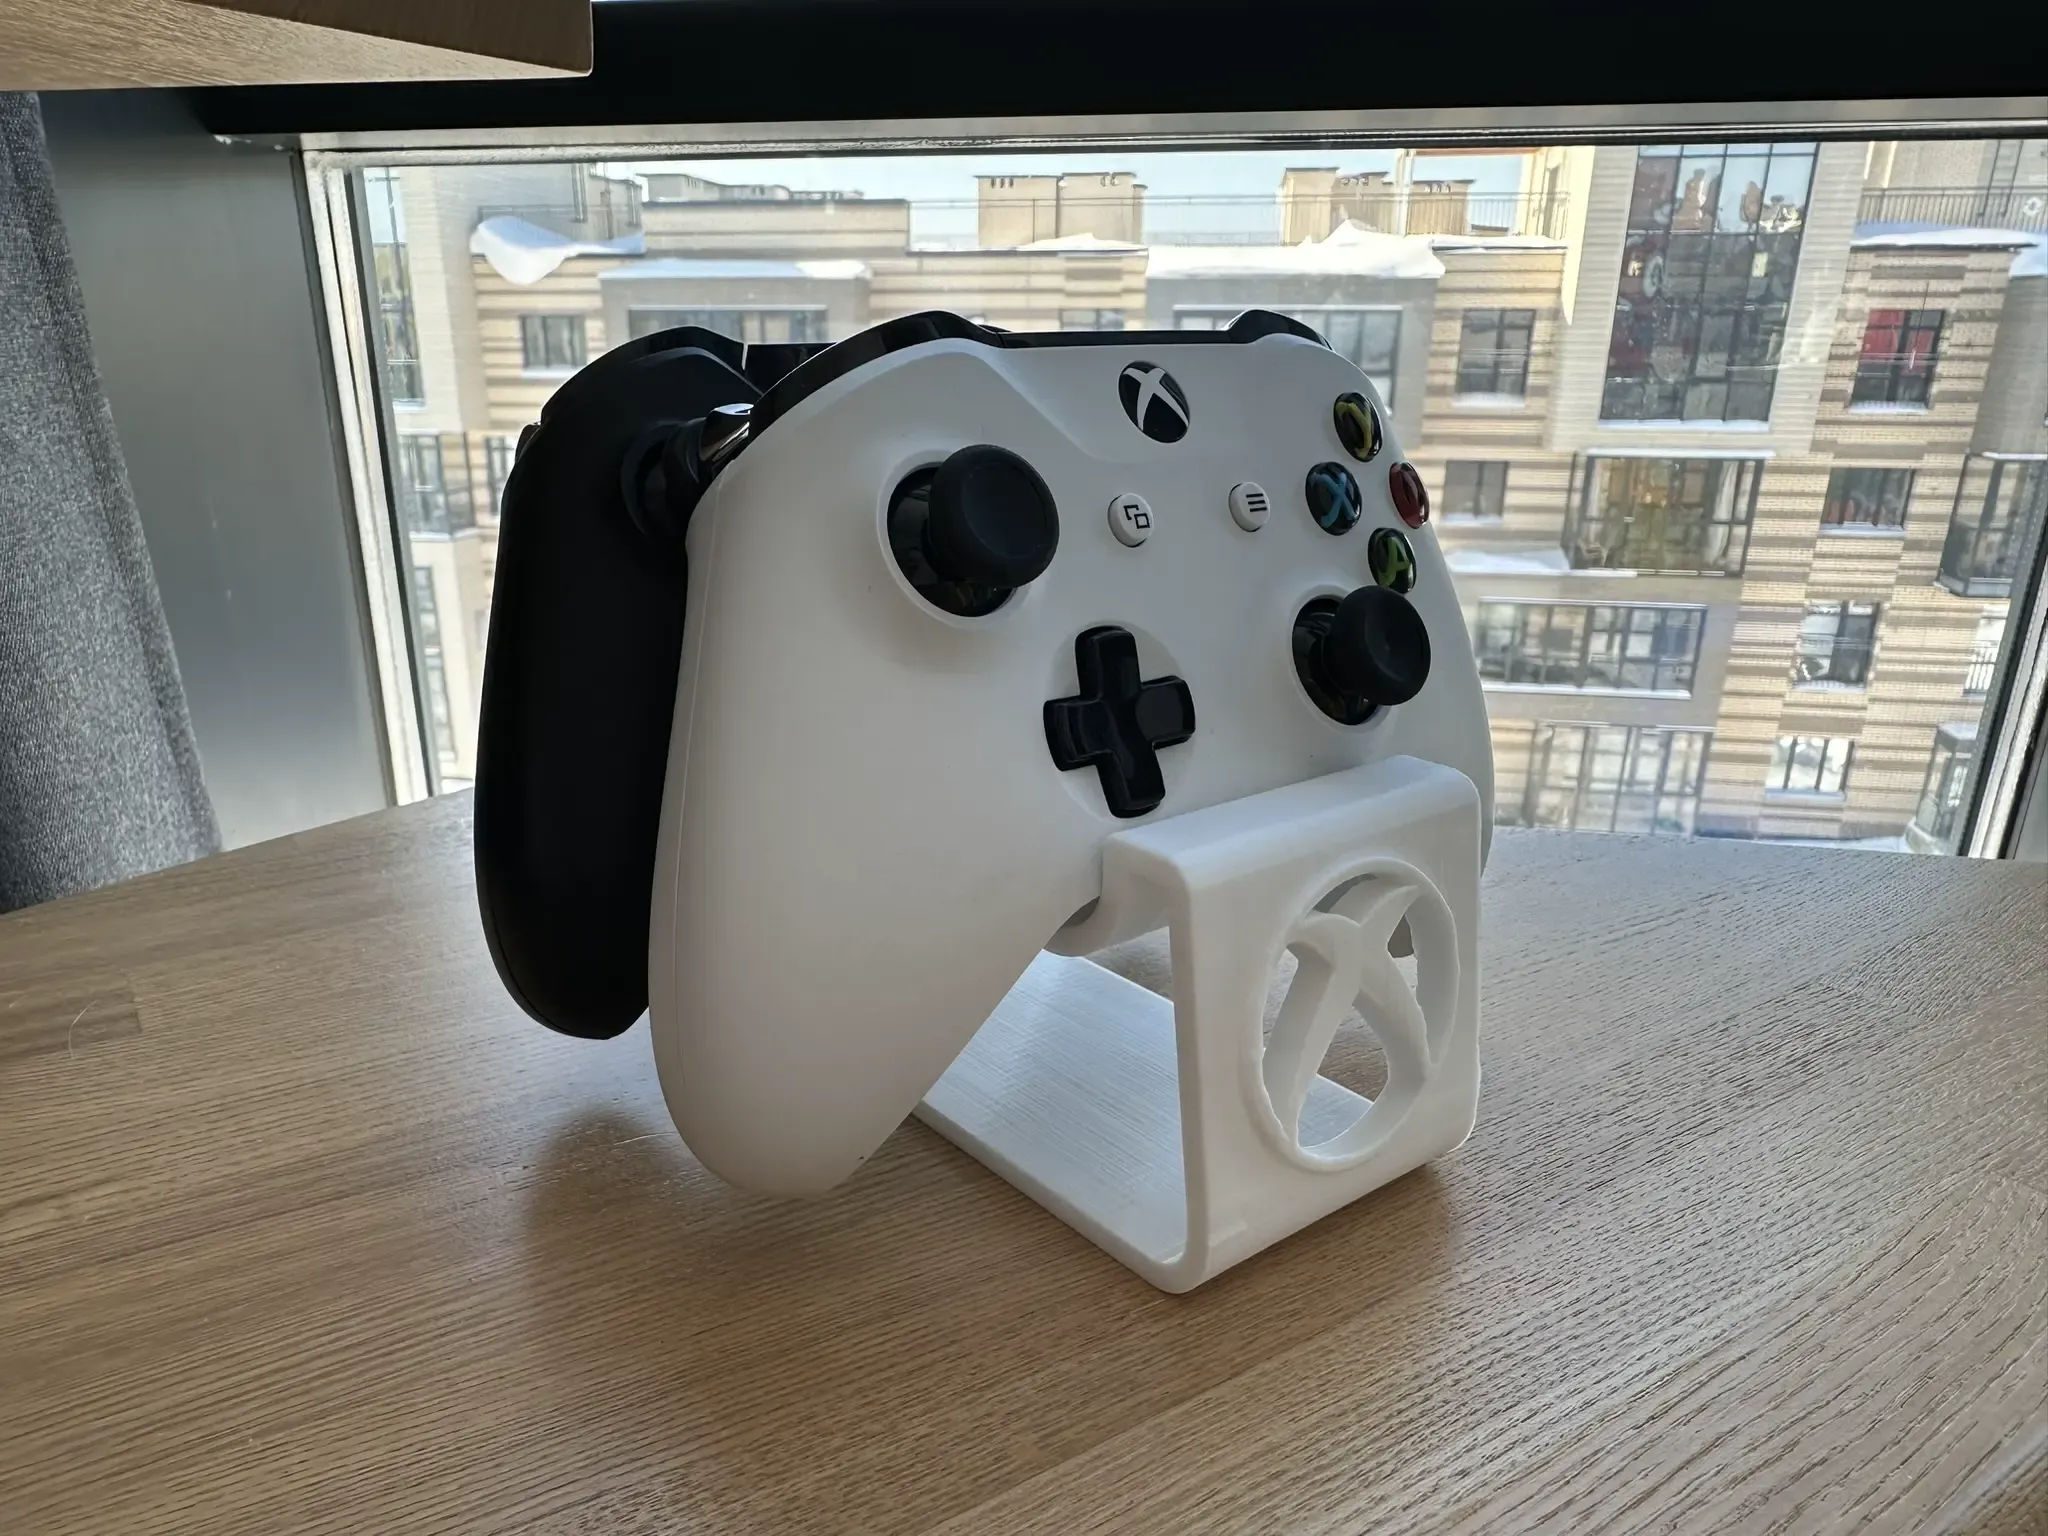 Stand for two xbox controllers